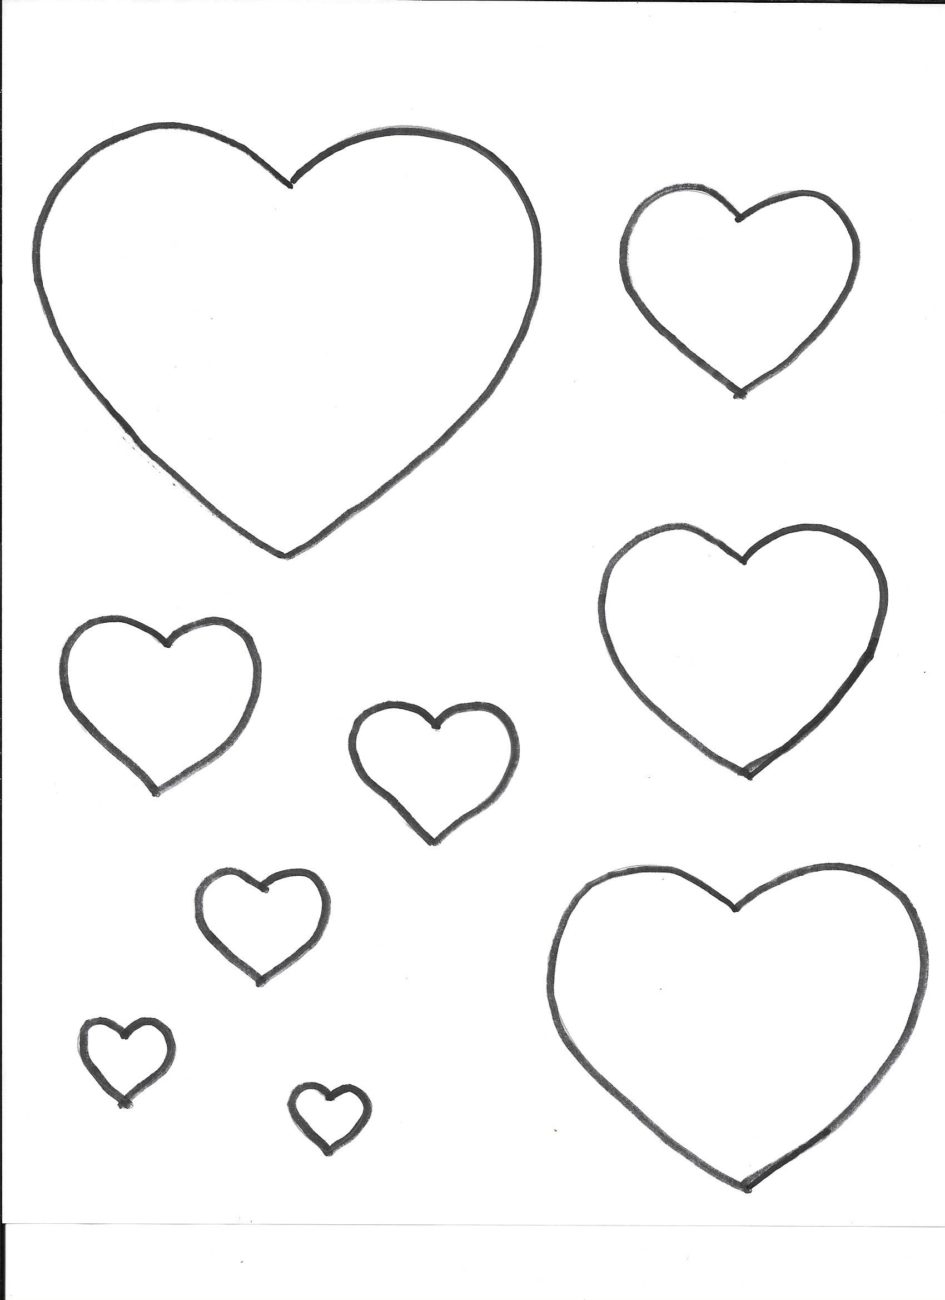 heart template 1 free printable no you need to calm down